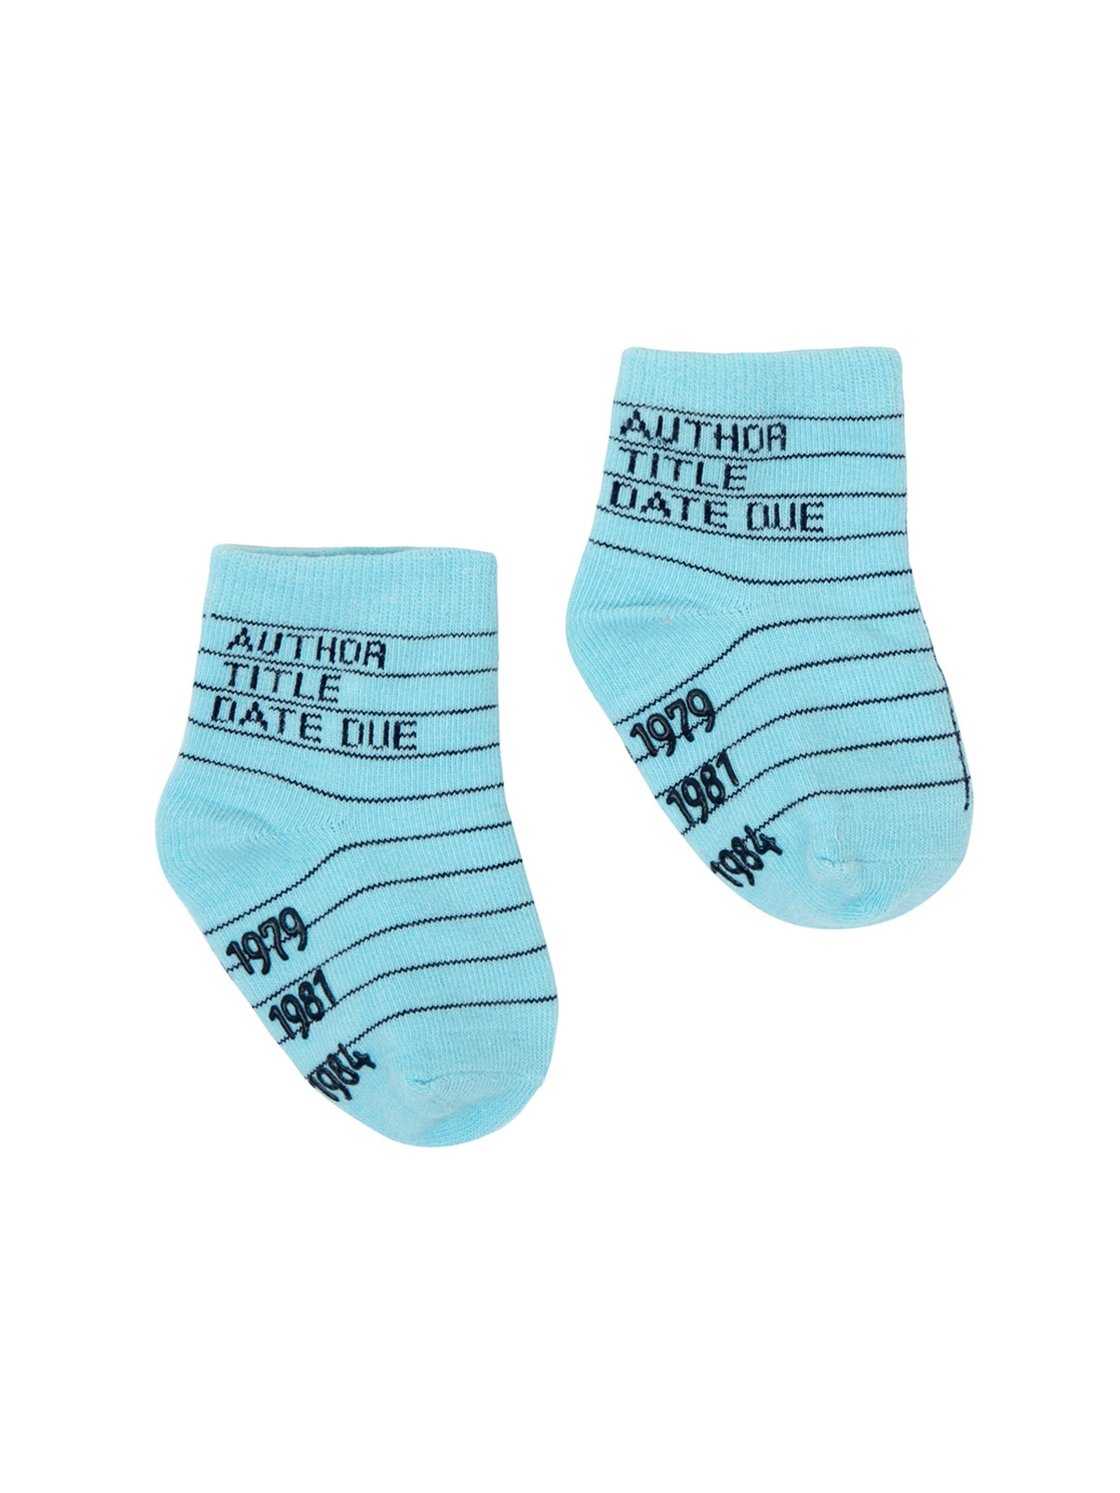 These kid's cotton crew socks in blue by the brand Out of Print feature the iconic library card design with the words 